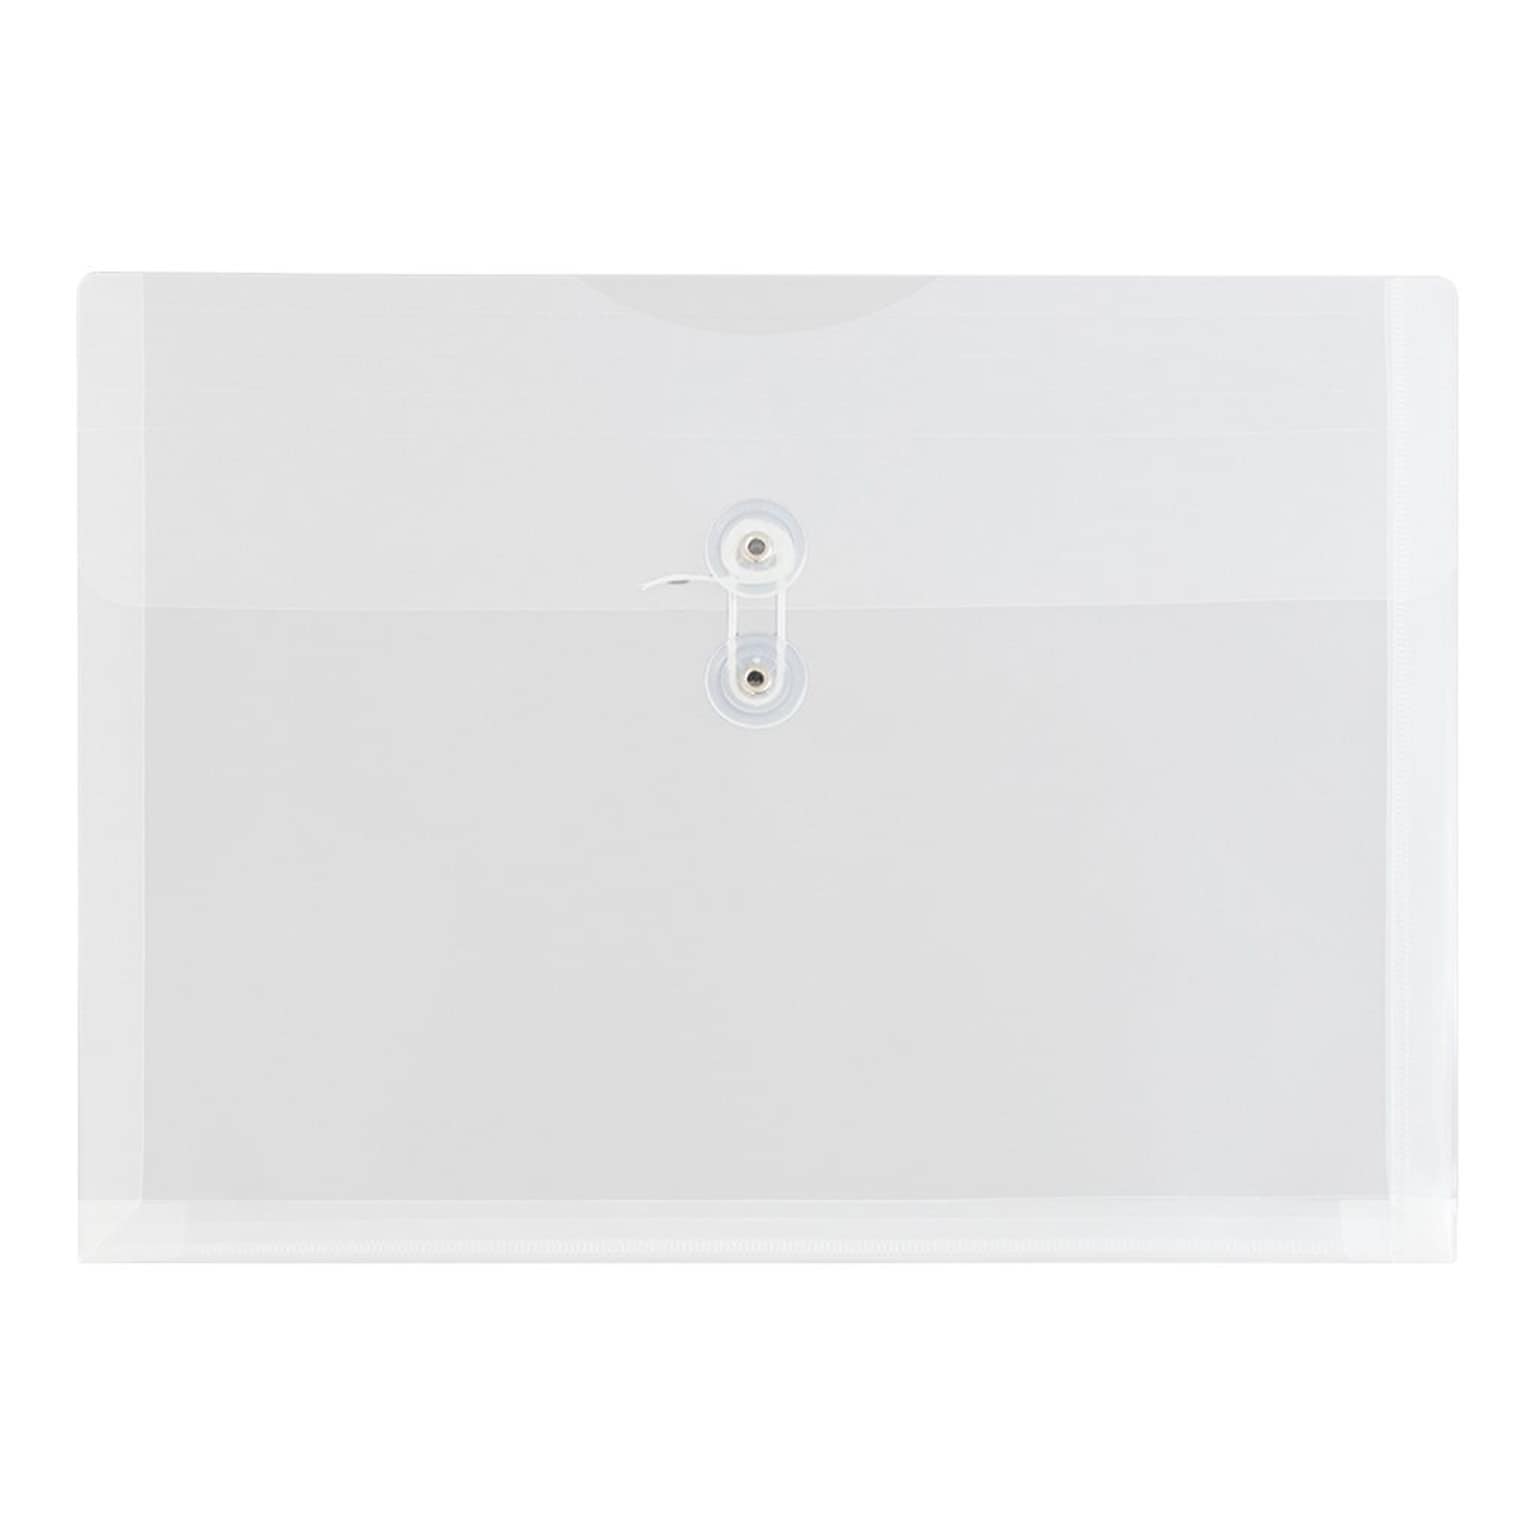 JAM Paper Poly Envelope Button & String Tie Closure, 1 Expansion, Letter Size, Clear, 12/Pack (218B1CL)